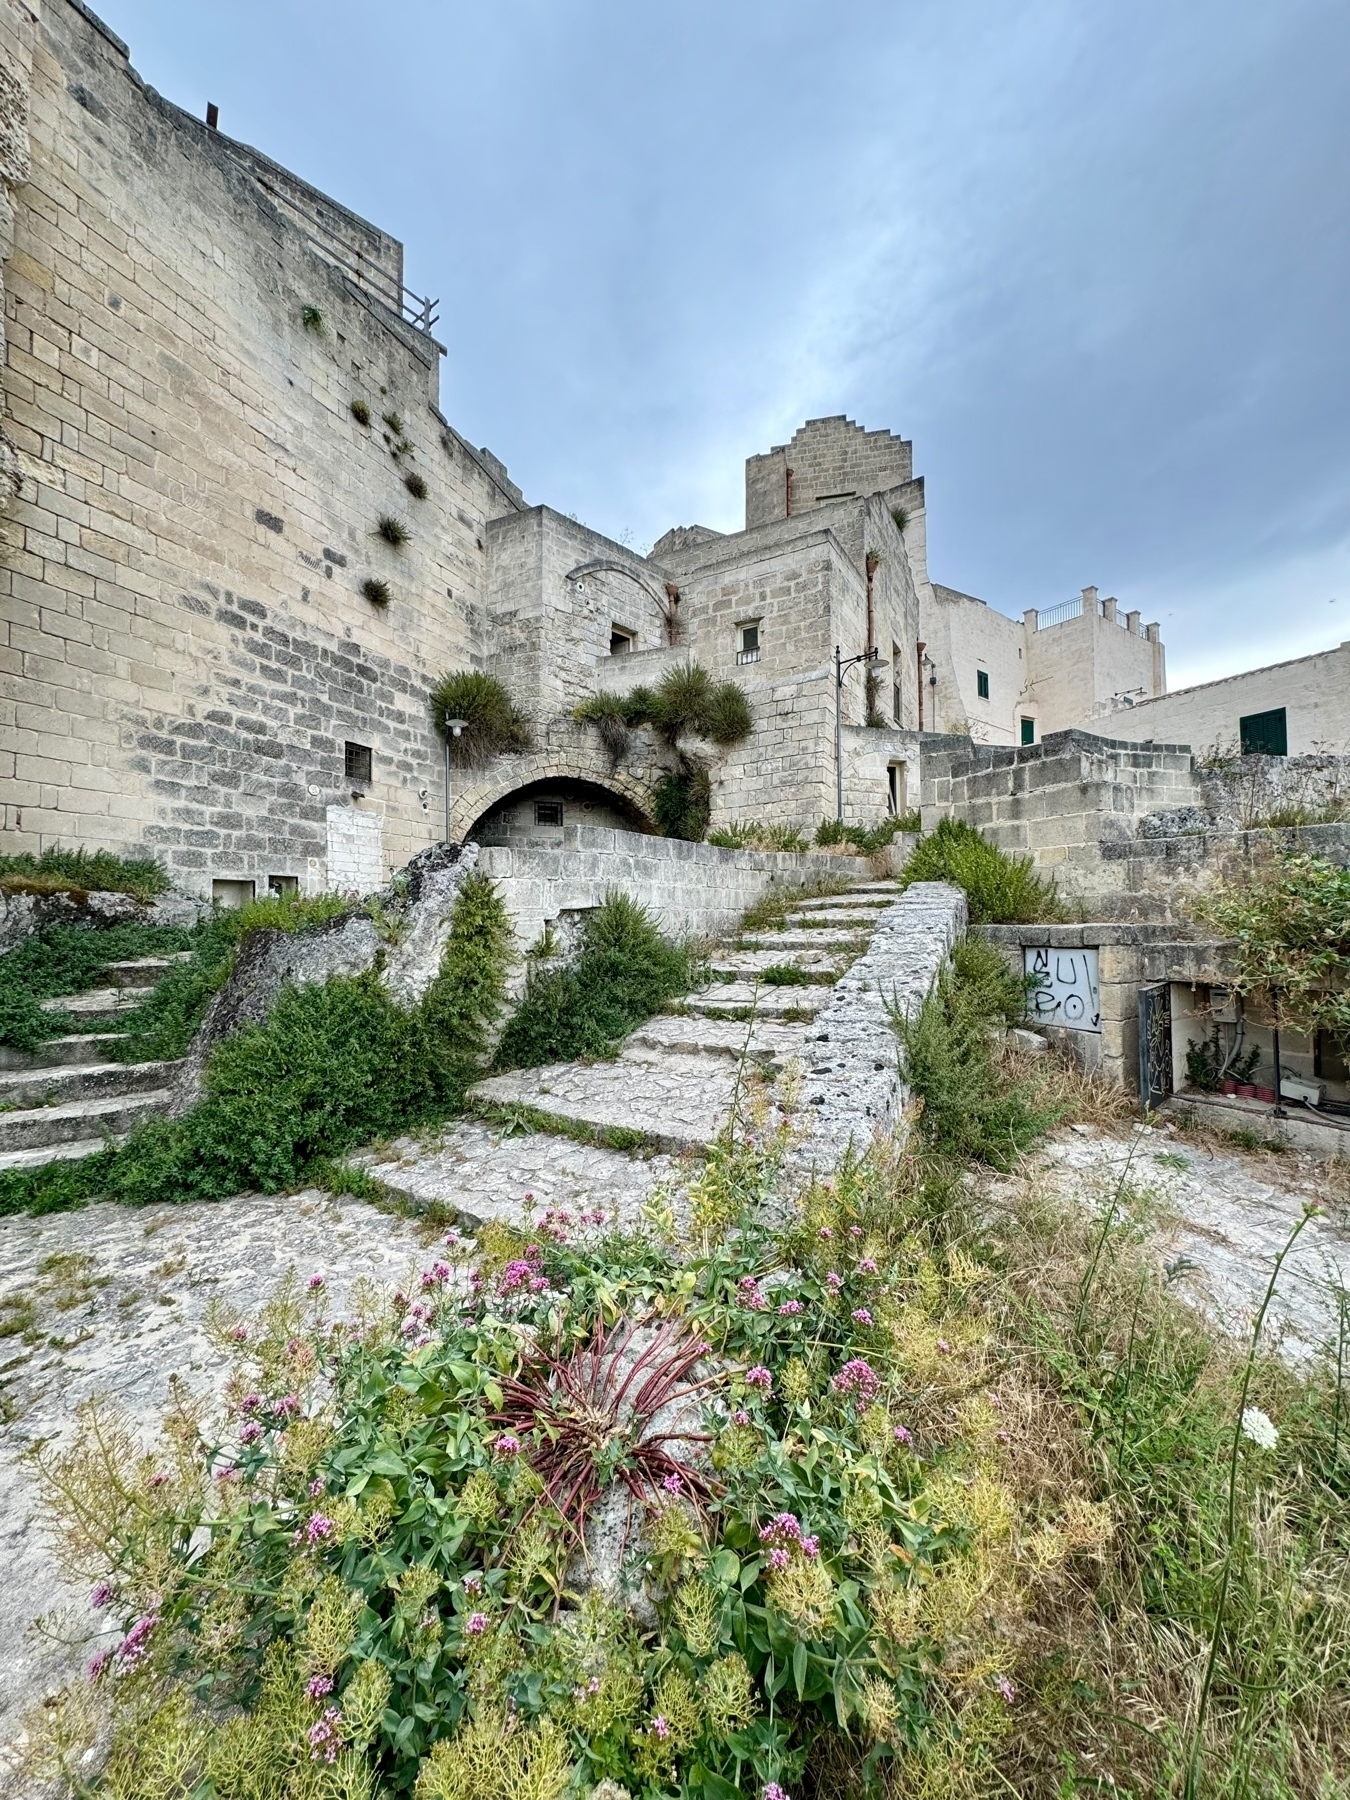 A historic stone structure with a weathered, rustic appearance. The image shows a series of stone steps, lush greenery, and flowering plants in the foreground. Buildings with arched doorways and small windows are present, and the stone walls have plants growing. 